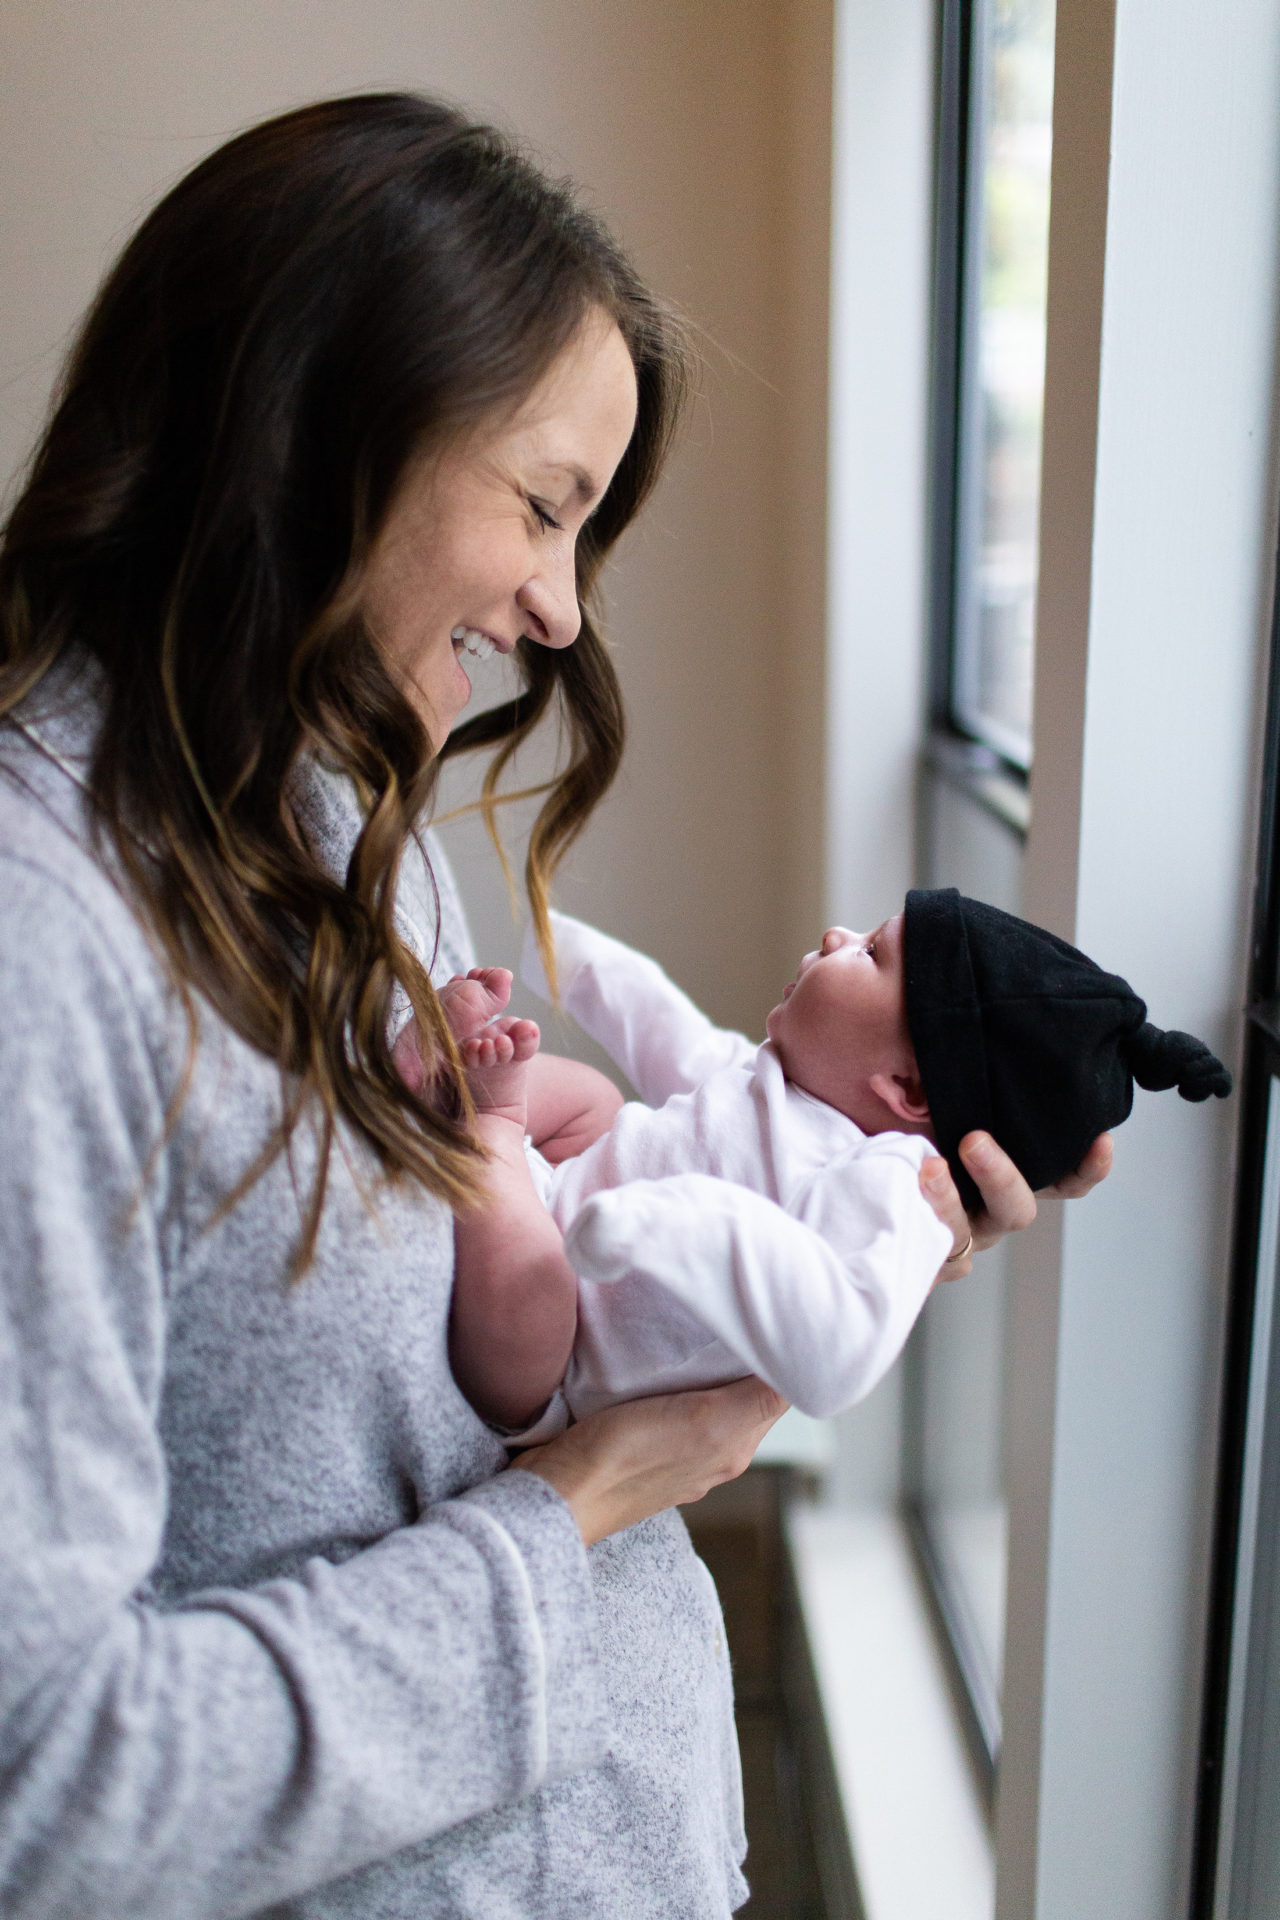 What To Wear After Giving Birth  Best Postpartum Clothes Home From  Hospital - The Confused Millennial